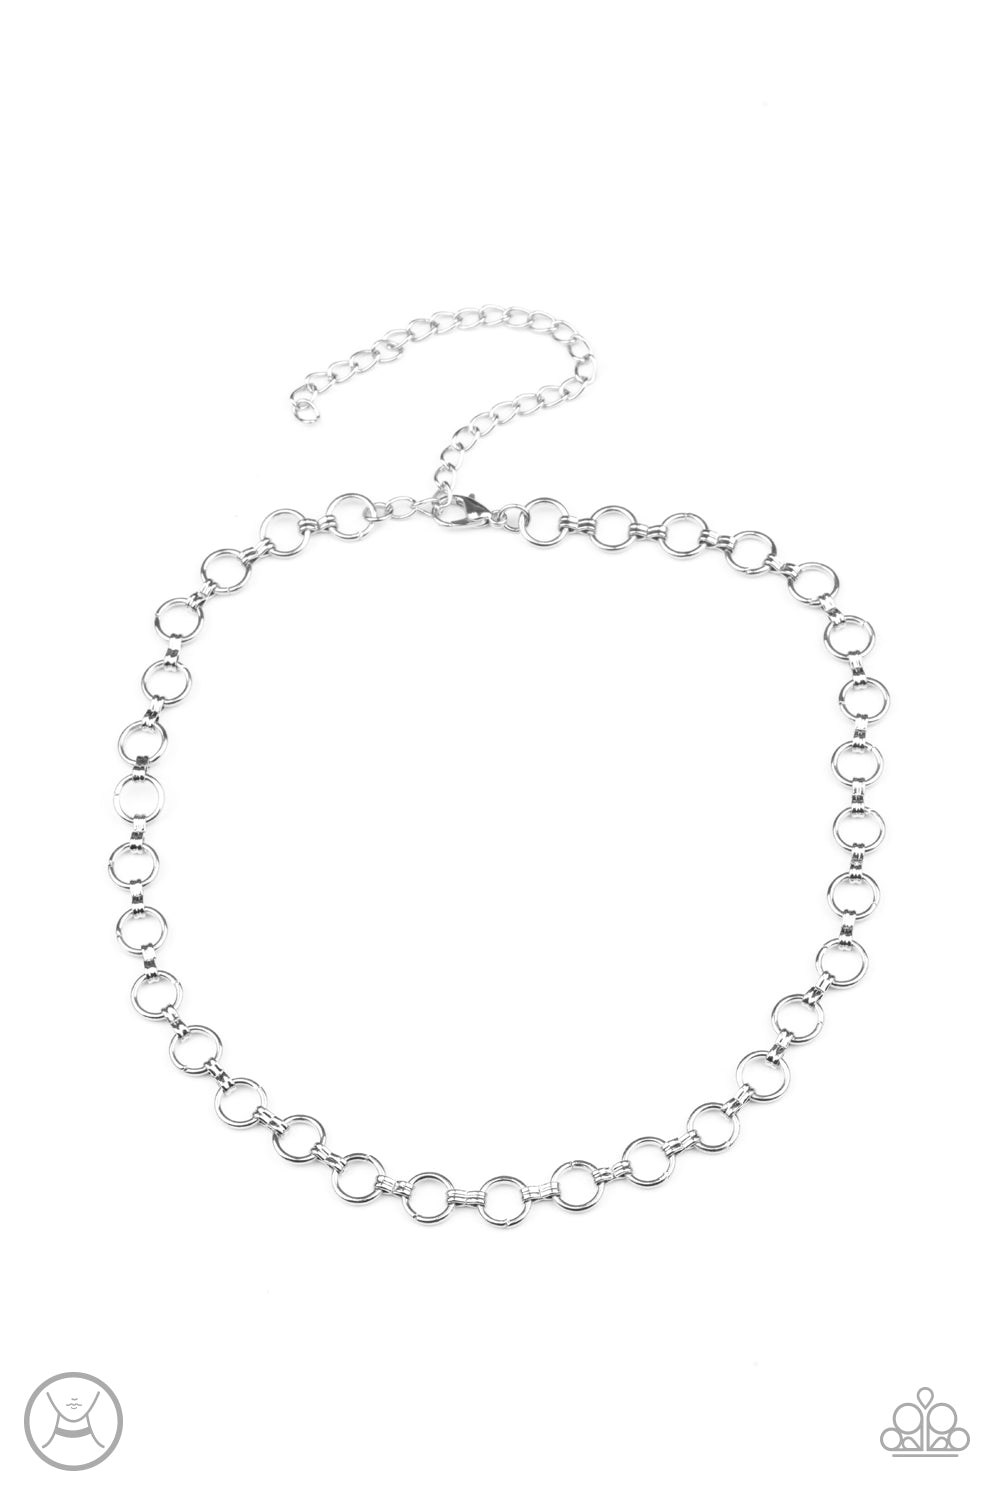 Paparazzi Accessories Insta Connection - Silver Necklaces - Lady T Accessories